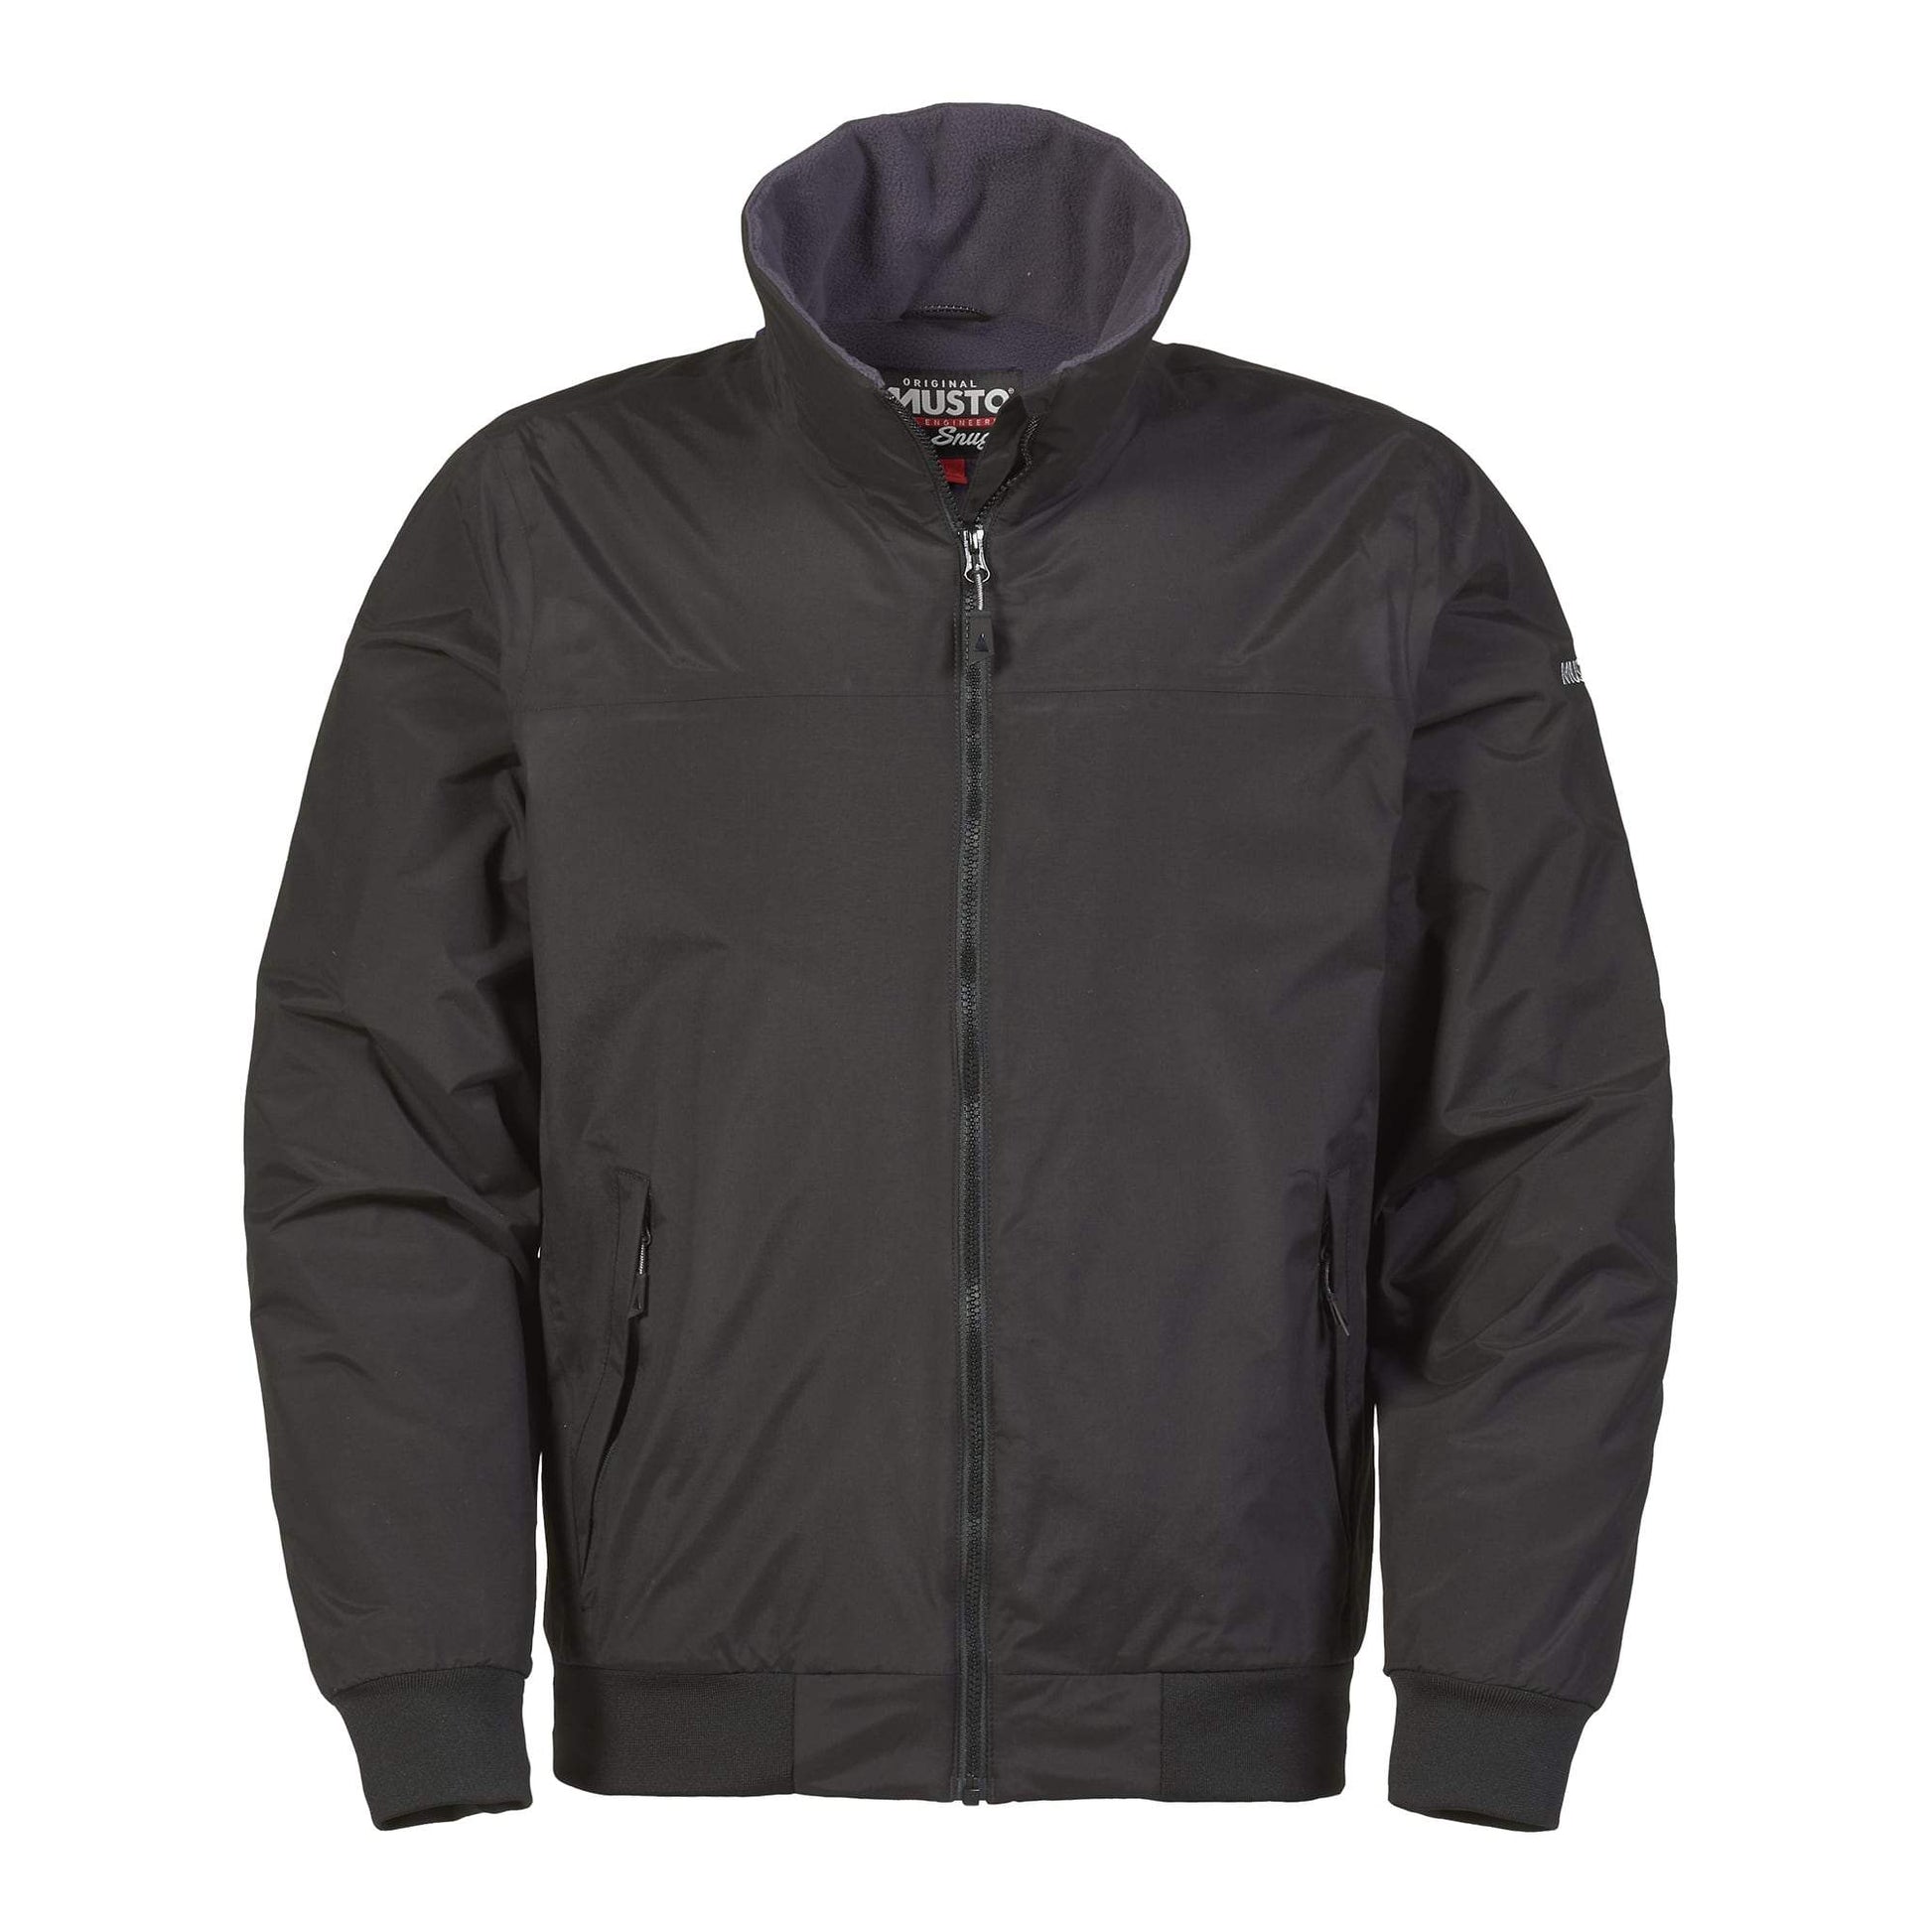 Men's Snug Blouson Jacket 2 by Musto - The Luxury Promotional Gifts Company Limited